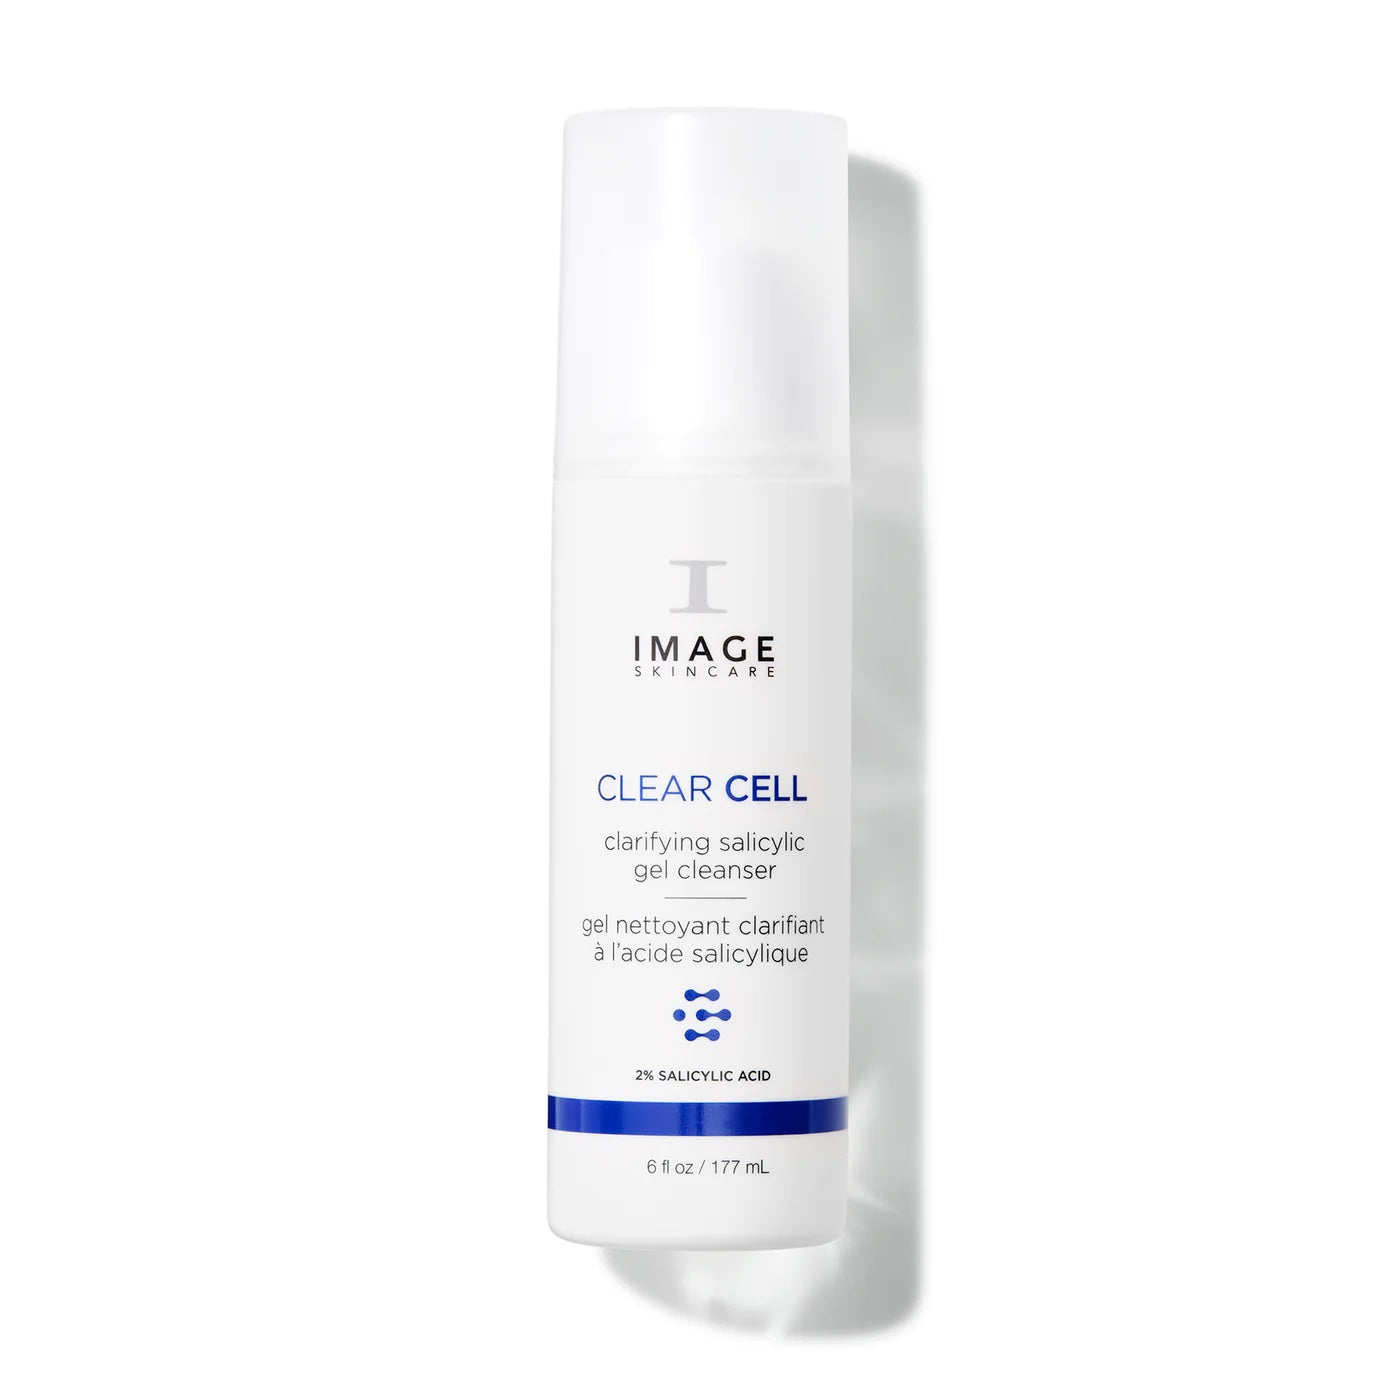 IMAGE CLEAR CELL salicylic gel cleanser